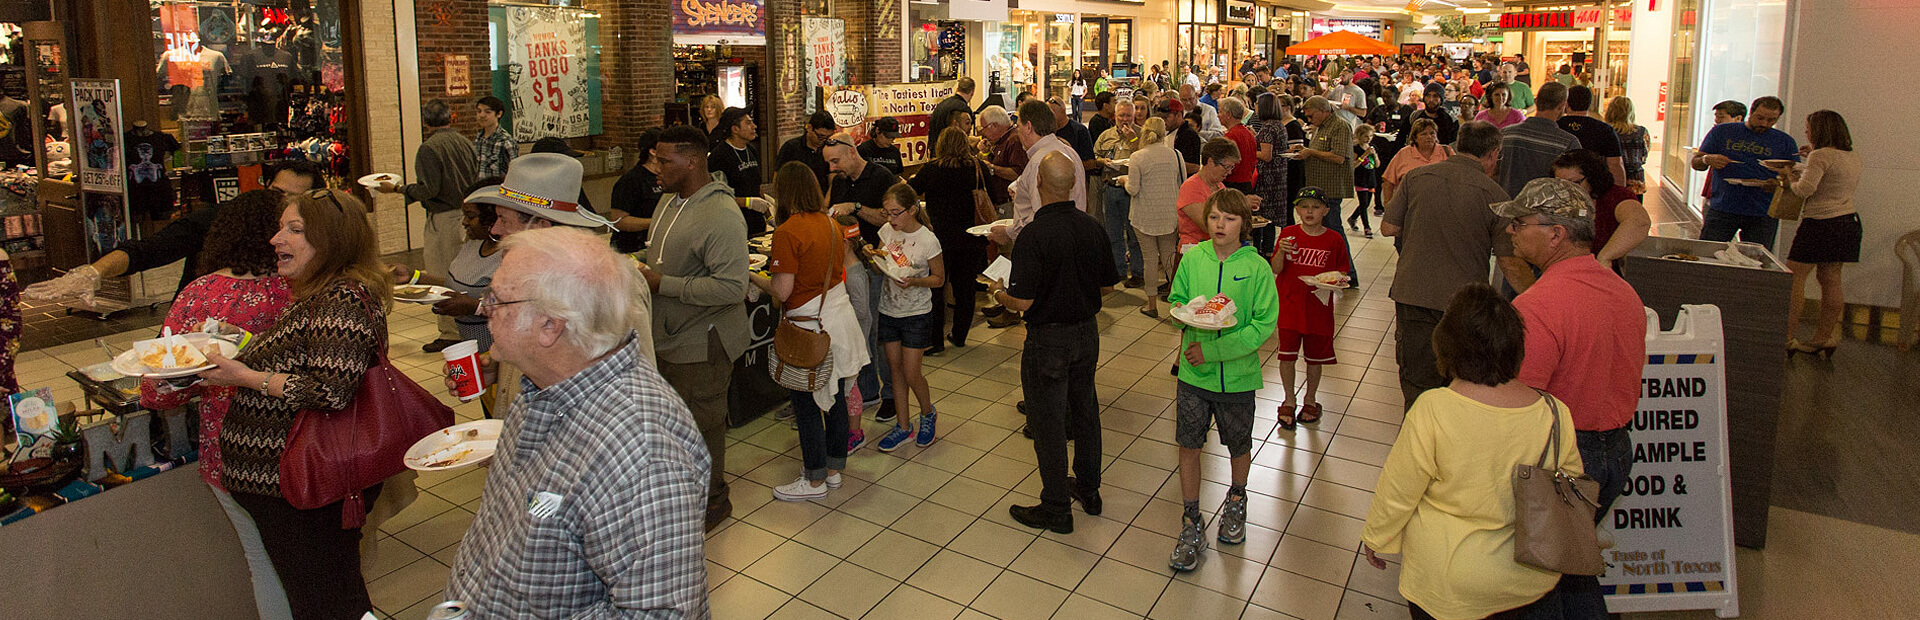 The Taste of North Texas Food and Drink Event - Golden Triangle Mall